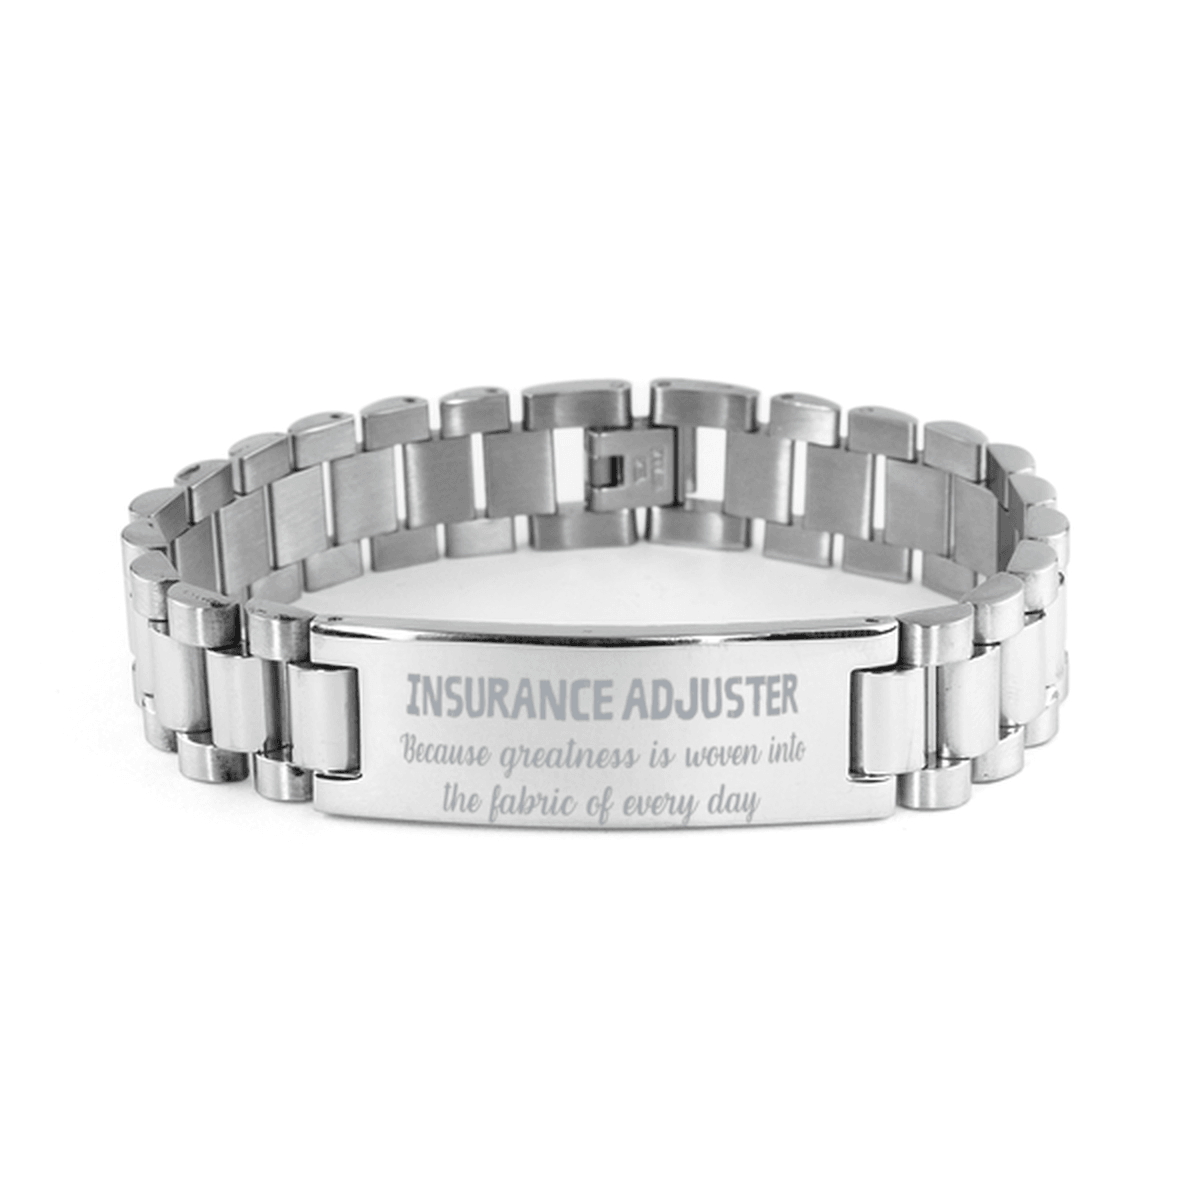 Sarcastic Insurance Adjuster Ladder Stainless Steel Bracelet Gifts, Christmas Holiday Gifts for Insurance Adjuster Birthday, Insurance Adjuster: Because greatness is woven into the fabric of every day, Coworkers, Friends - Mallard Moon Gift Shop